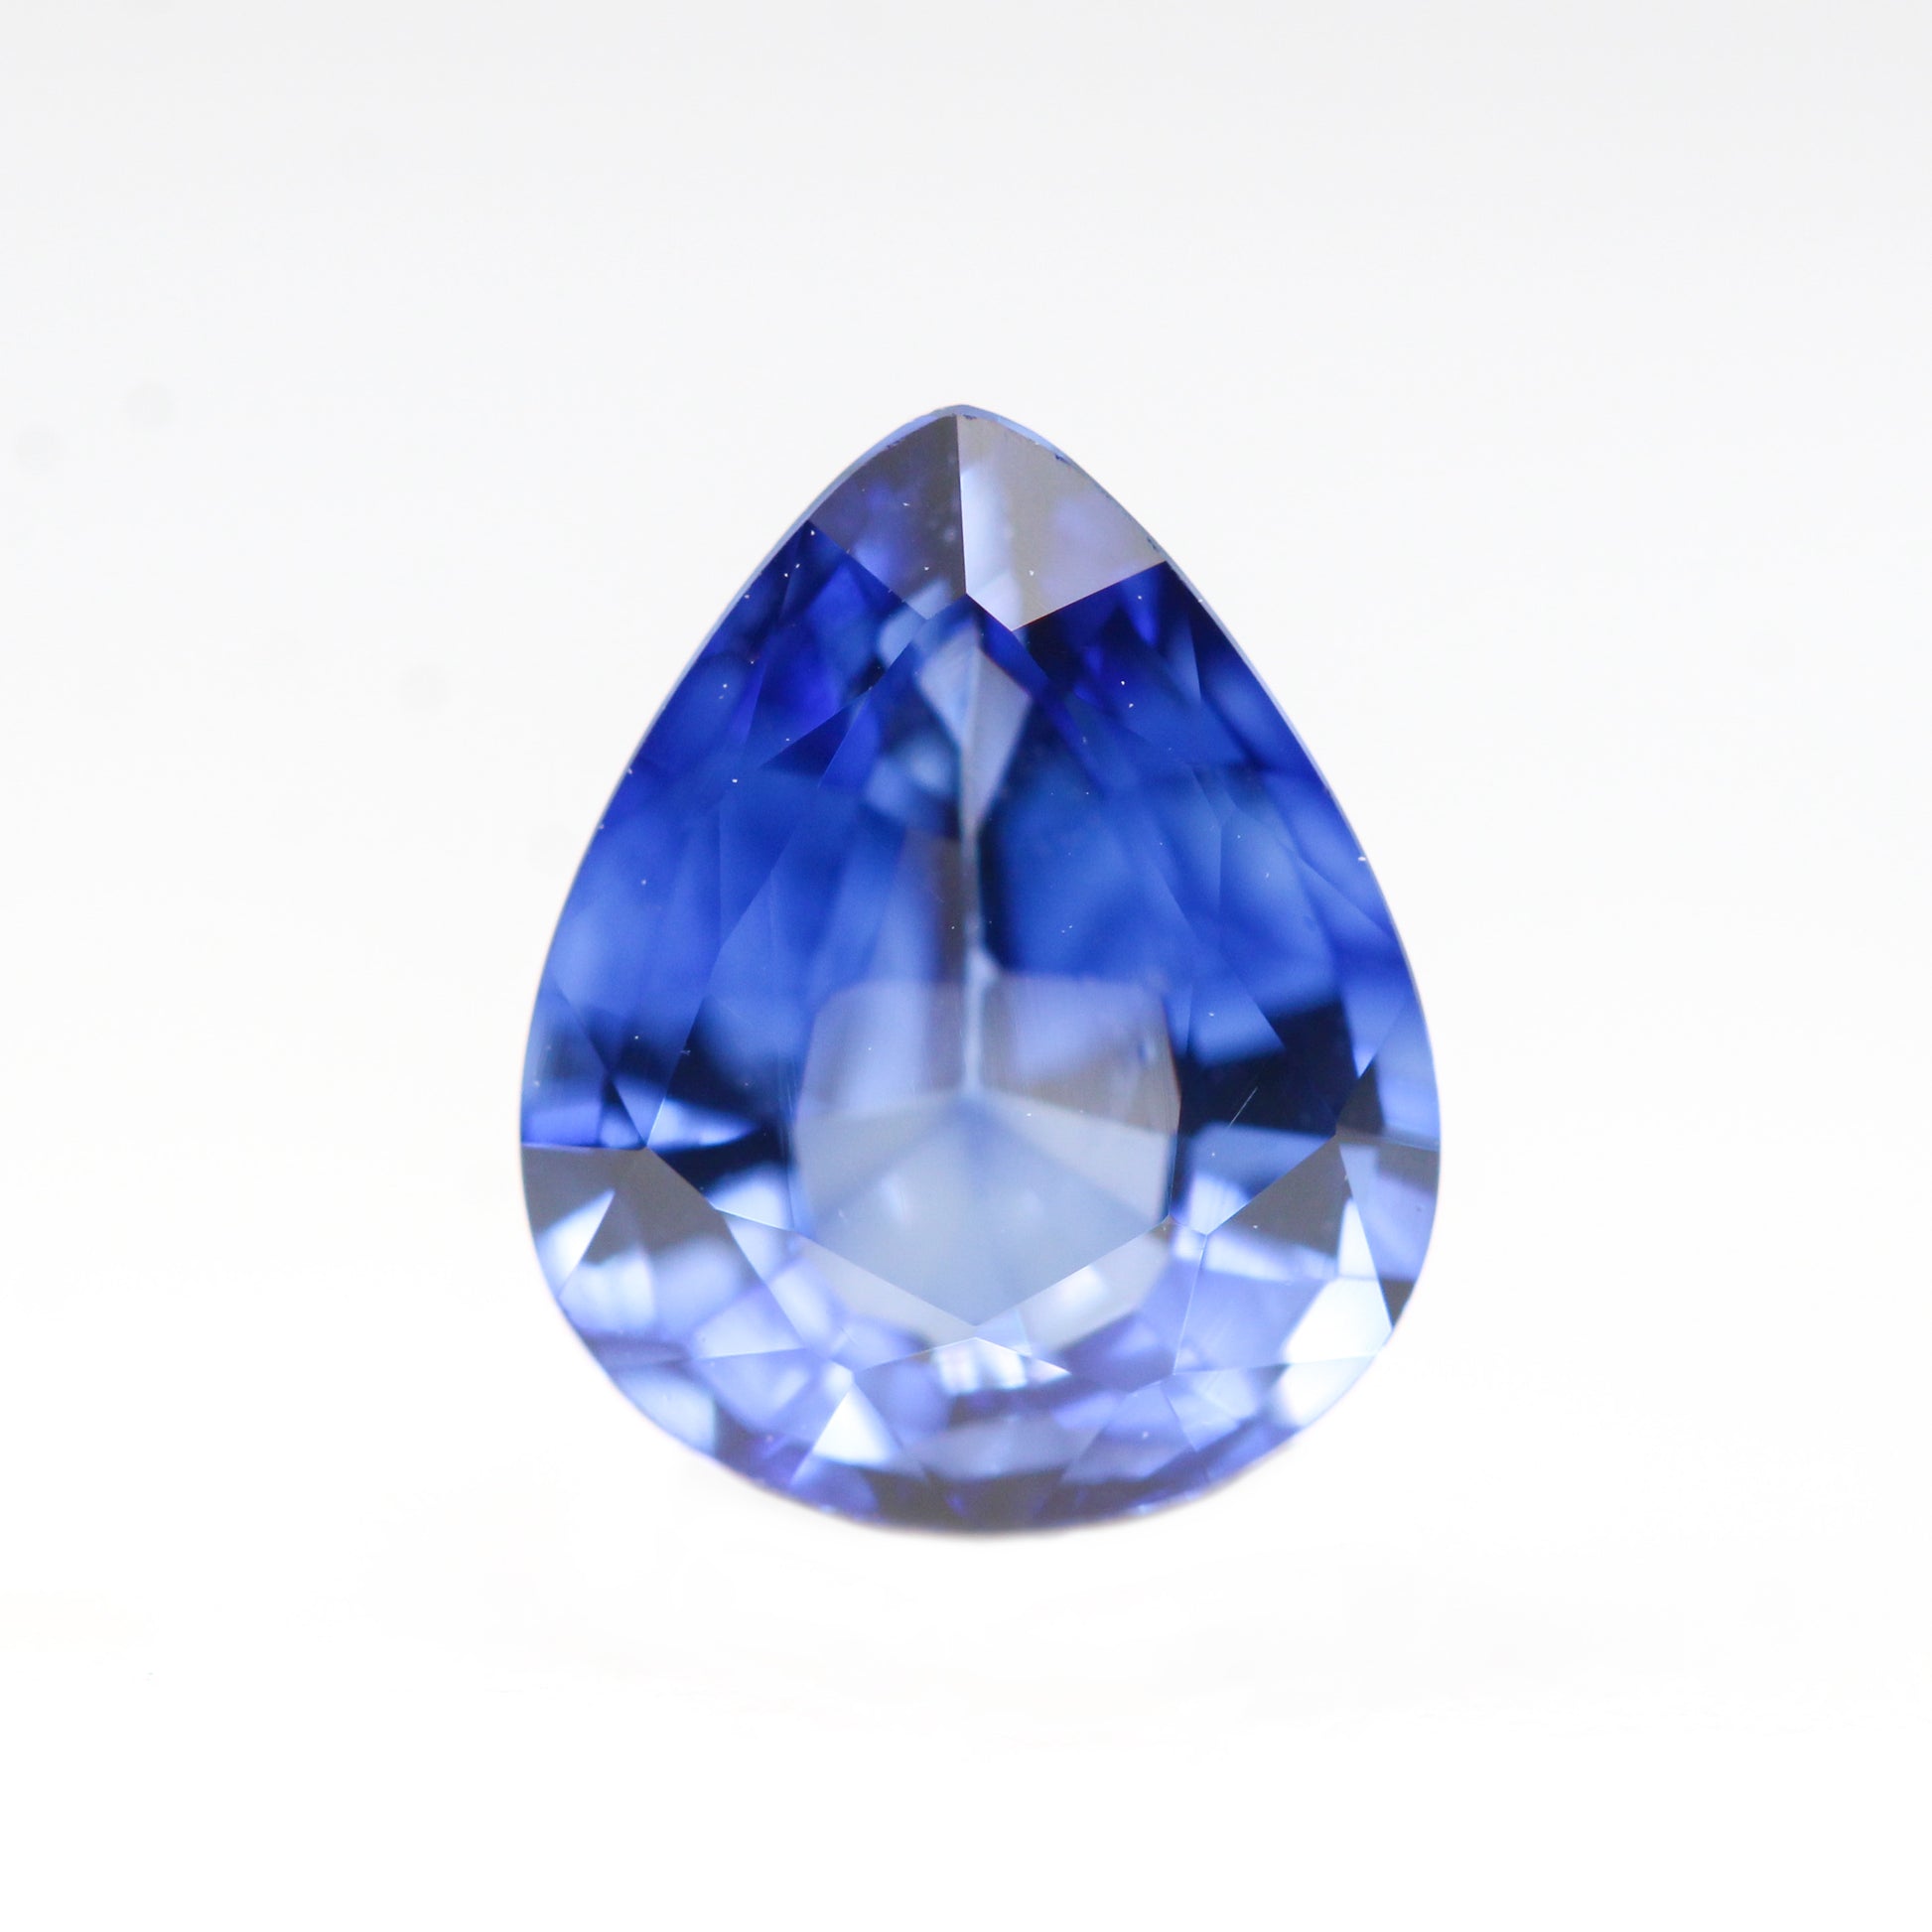 1.00 Carat Ceylon Blue Pear Sapphire for Custom Work - Inventory Code BPS100 - Midwinter Co. Alternative Bridal Rings and Modern Fine Jewelry